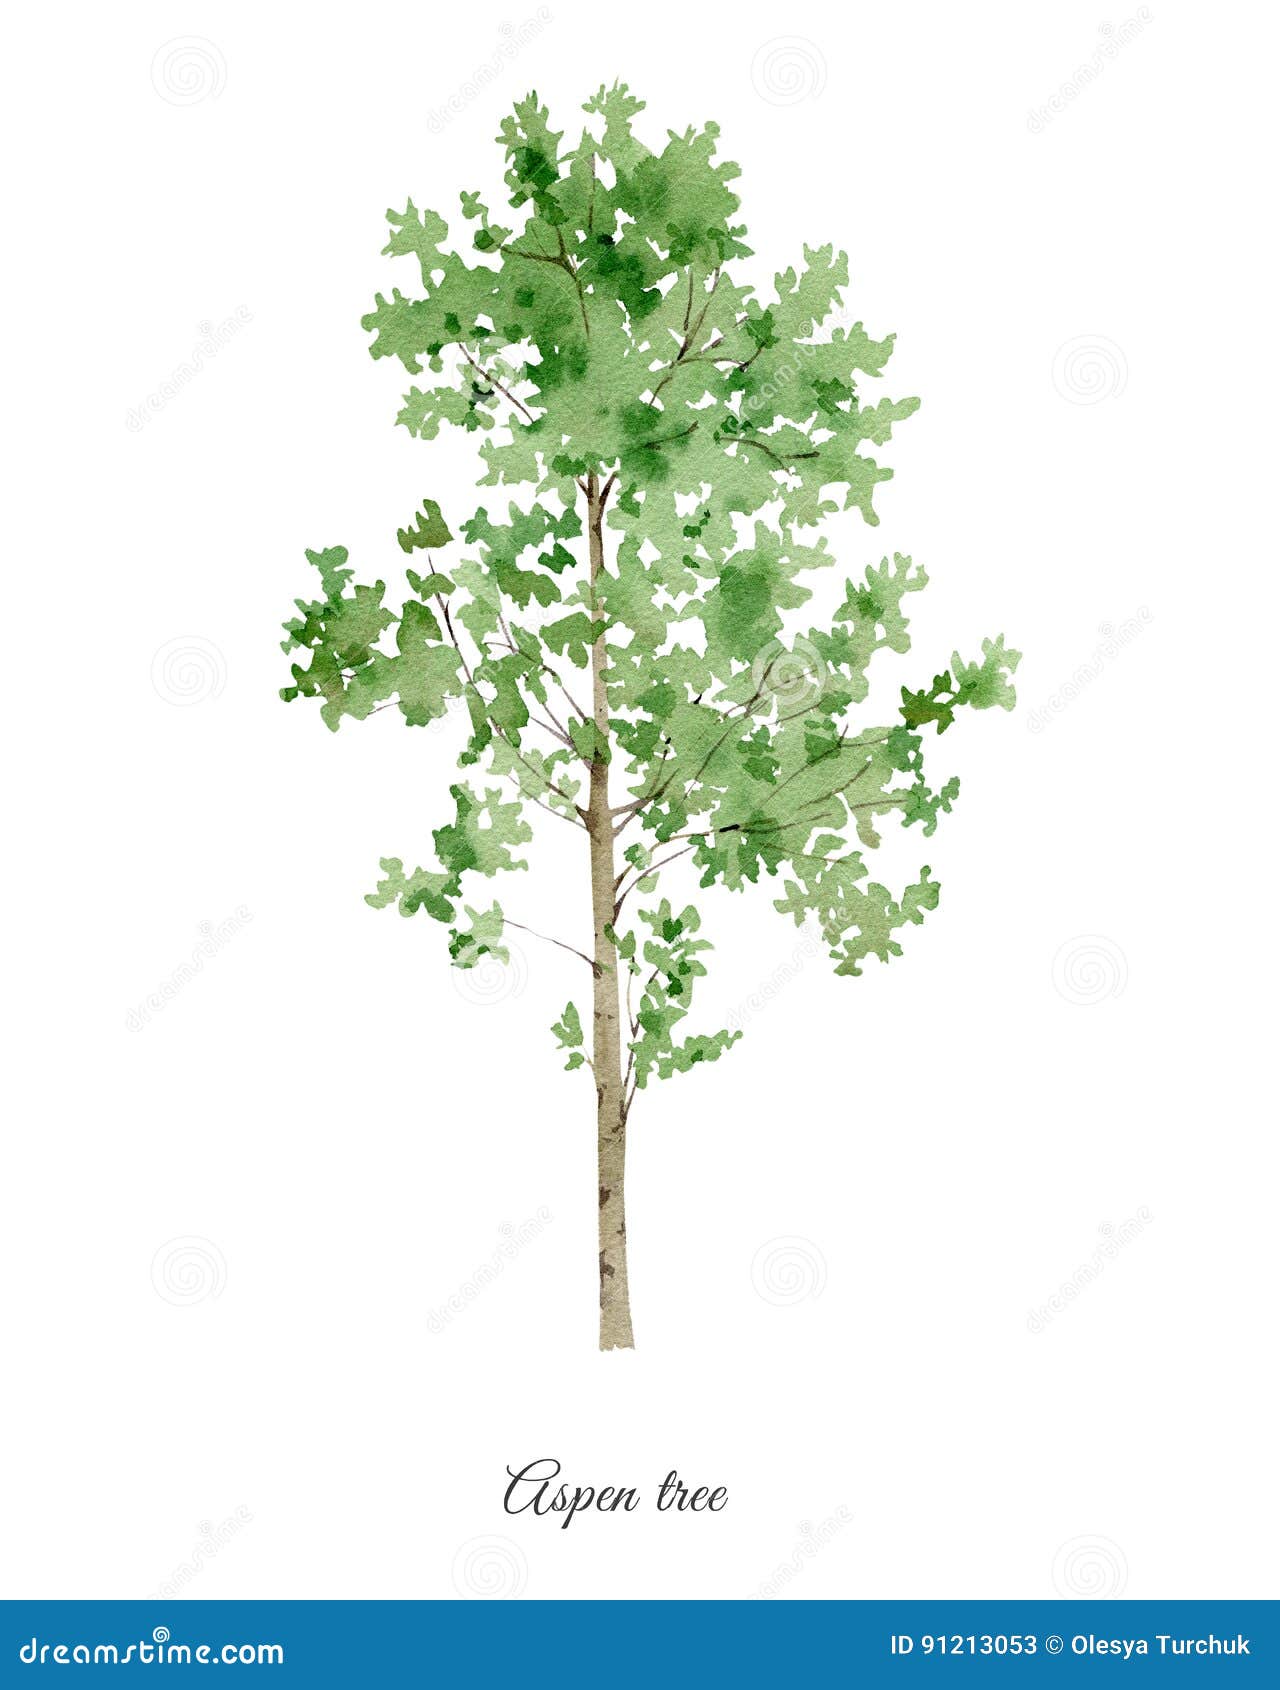 handpainted watercolor poster with aspen tree